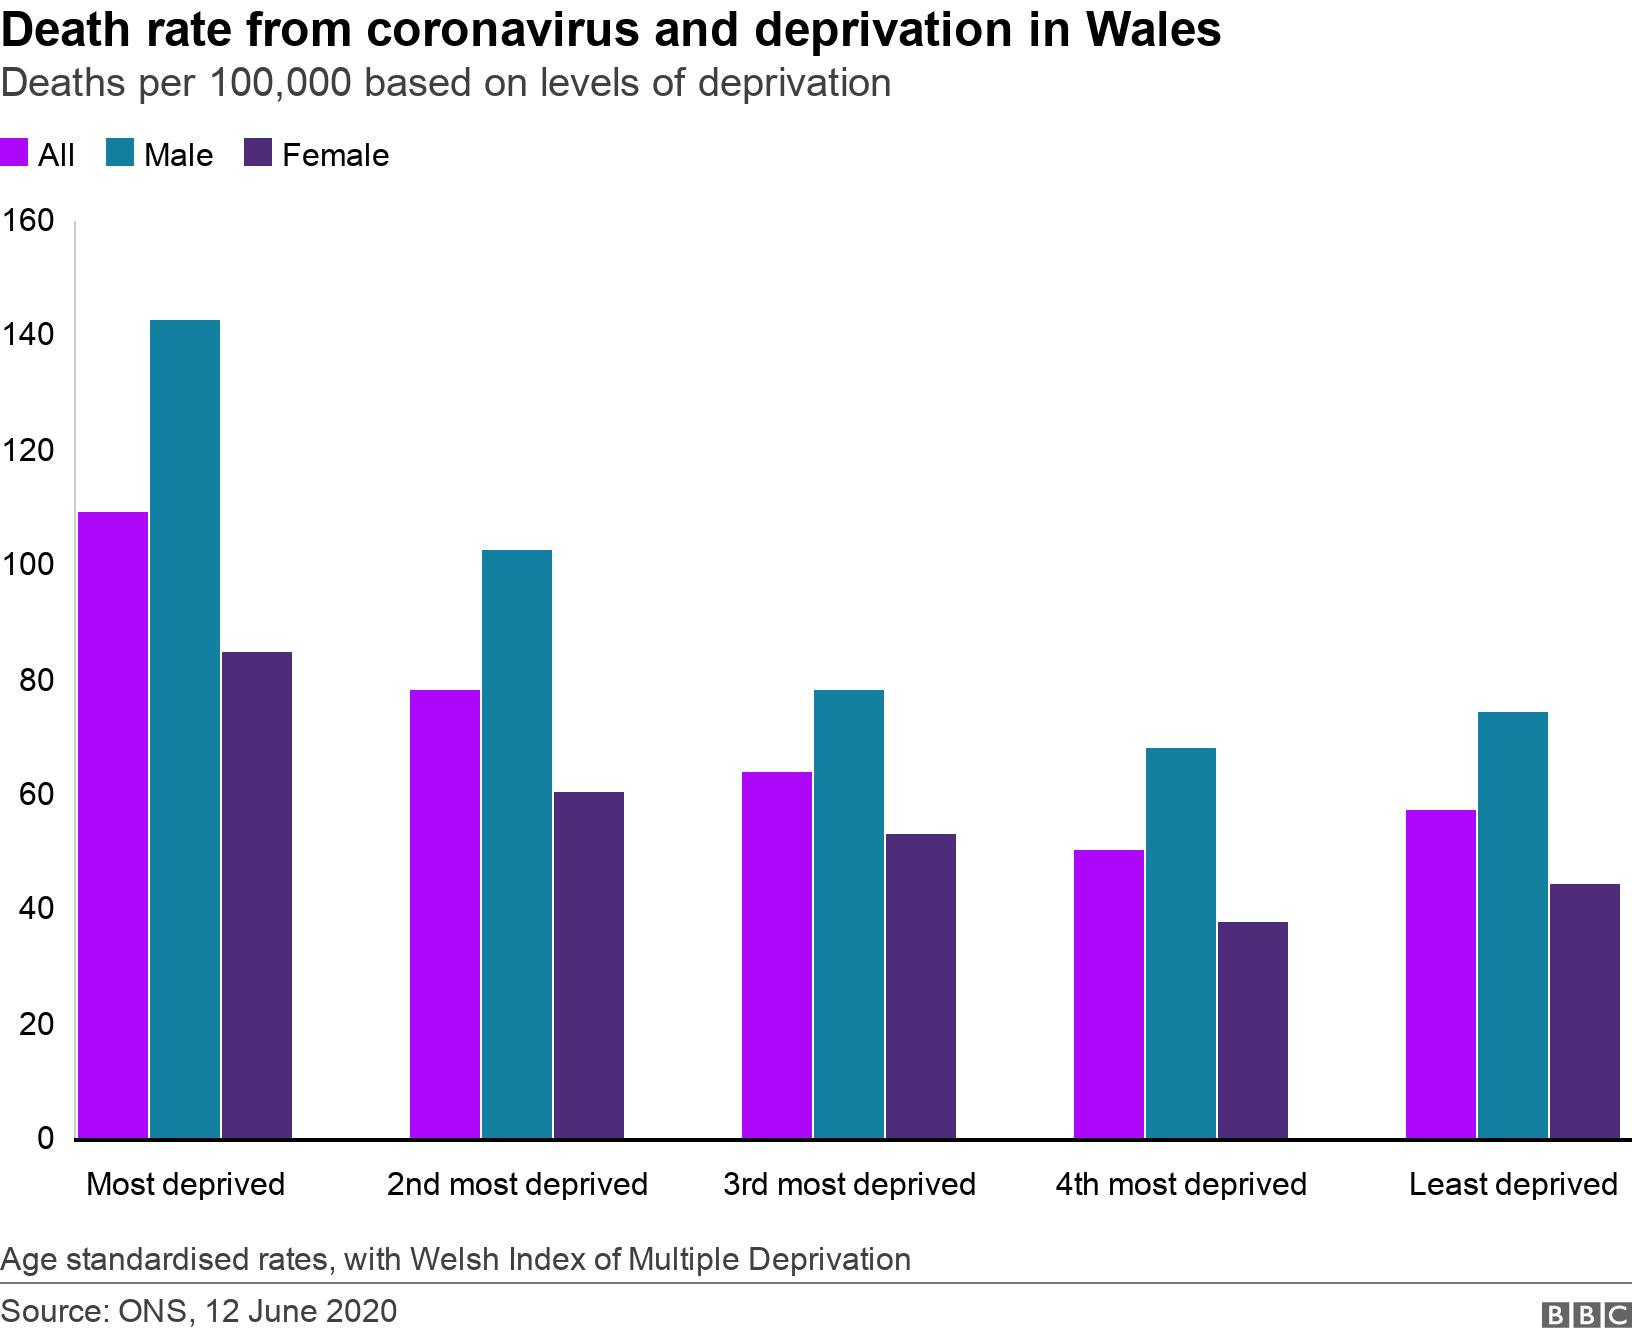 Death rate from coronavirus and deprivation in Wales. Deaths per 100,000 based on levels of deprivation. Age standardised rates, with Welsh Index of Multiple Deprivation.